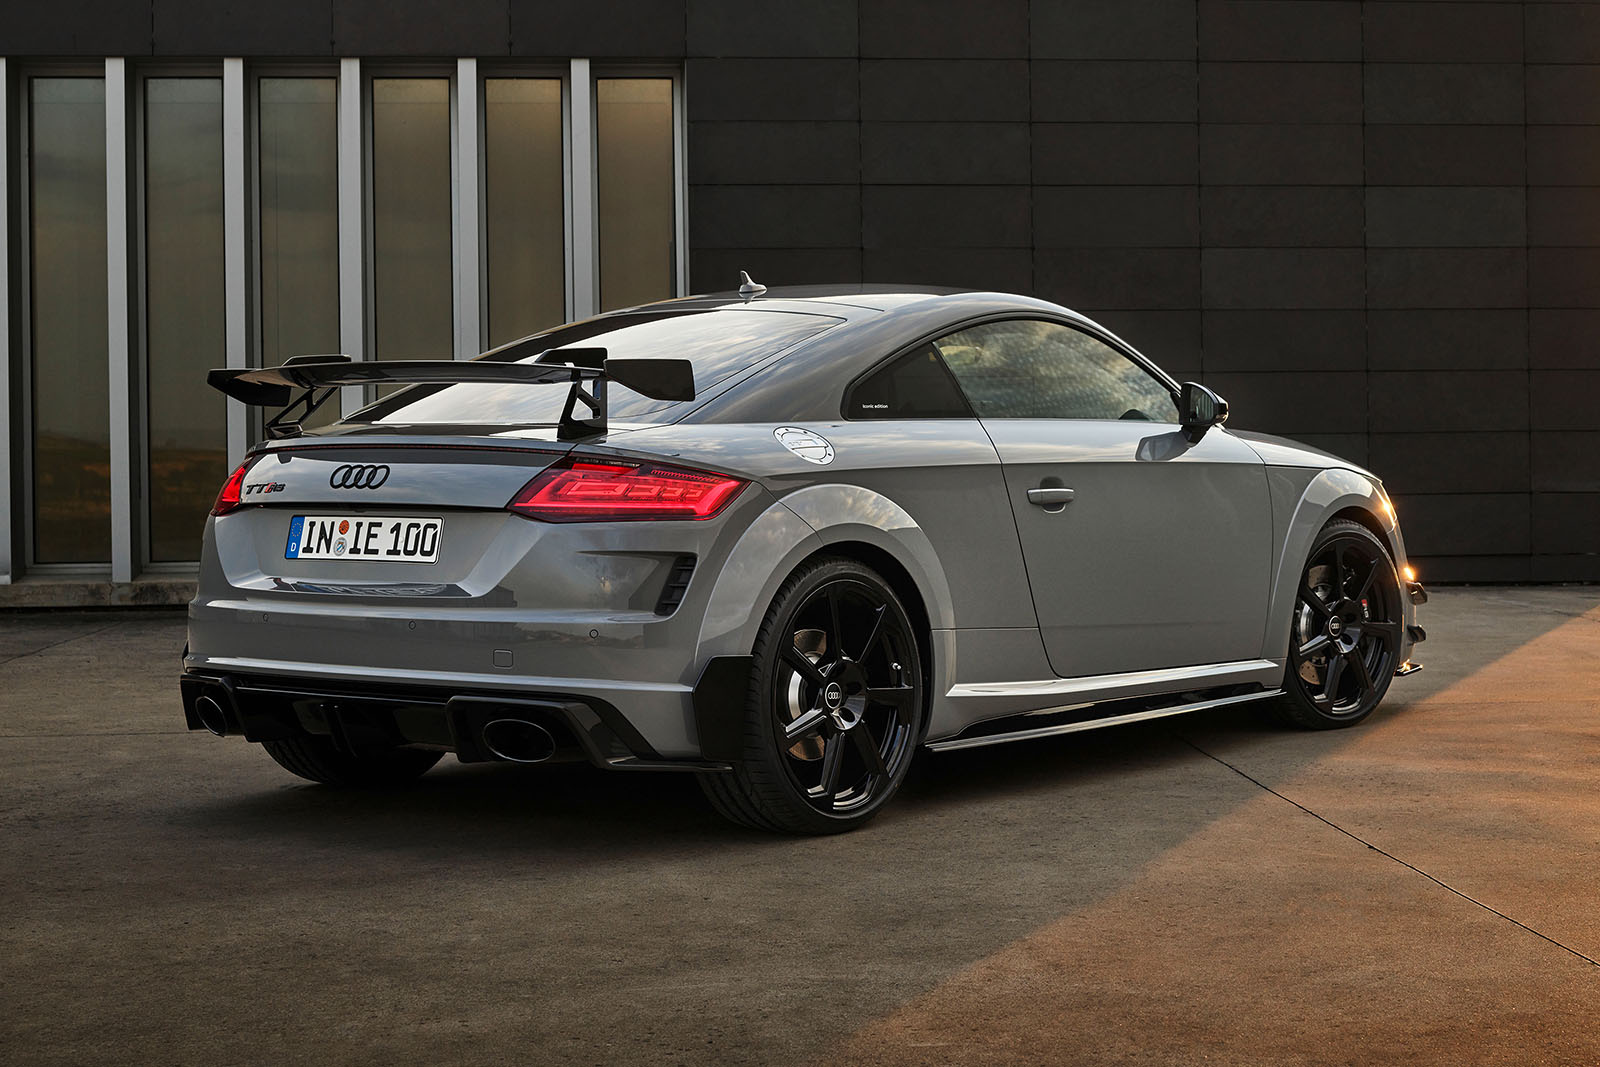 2023 Audi TT Roadster Marks The Final Edition Of the Iconic Model